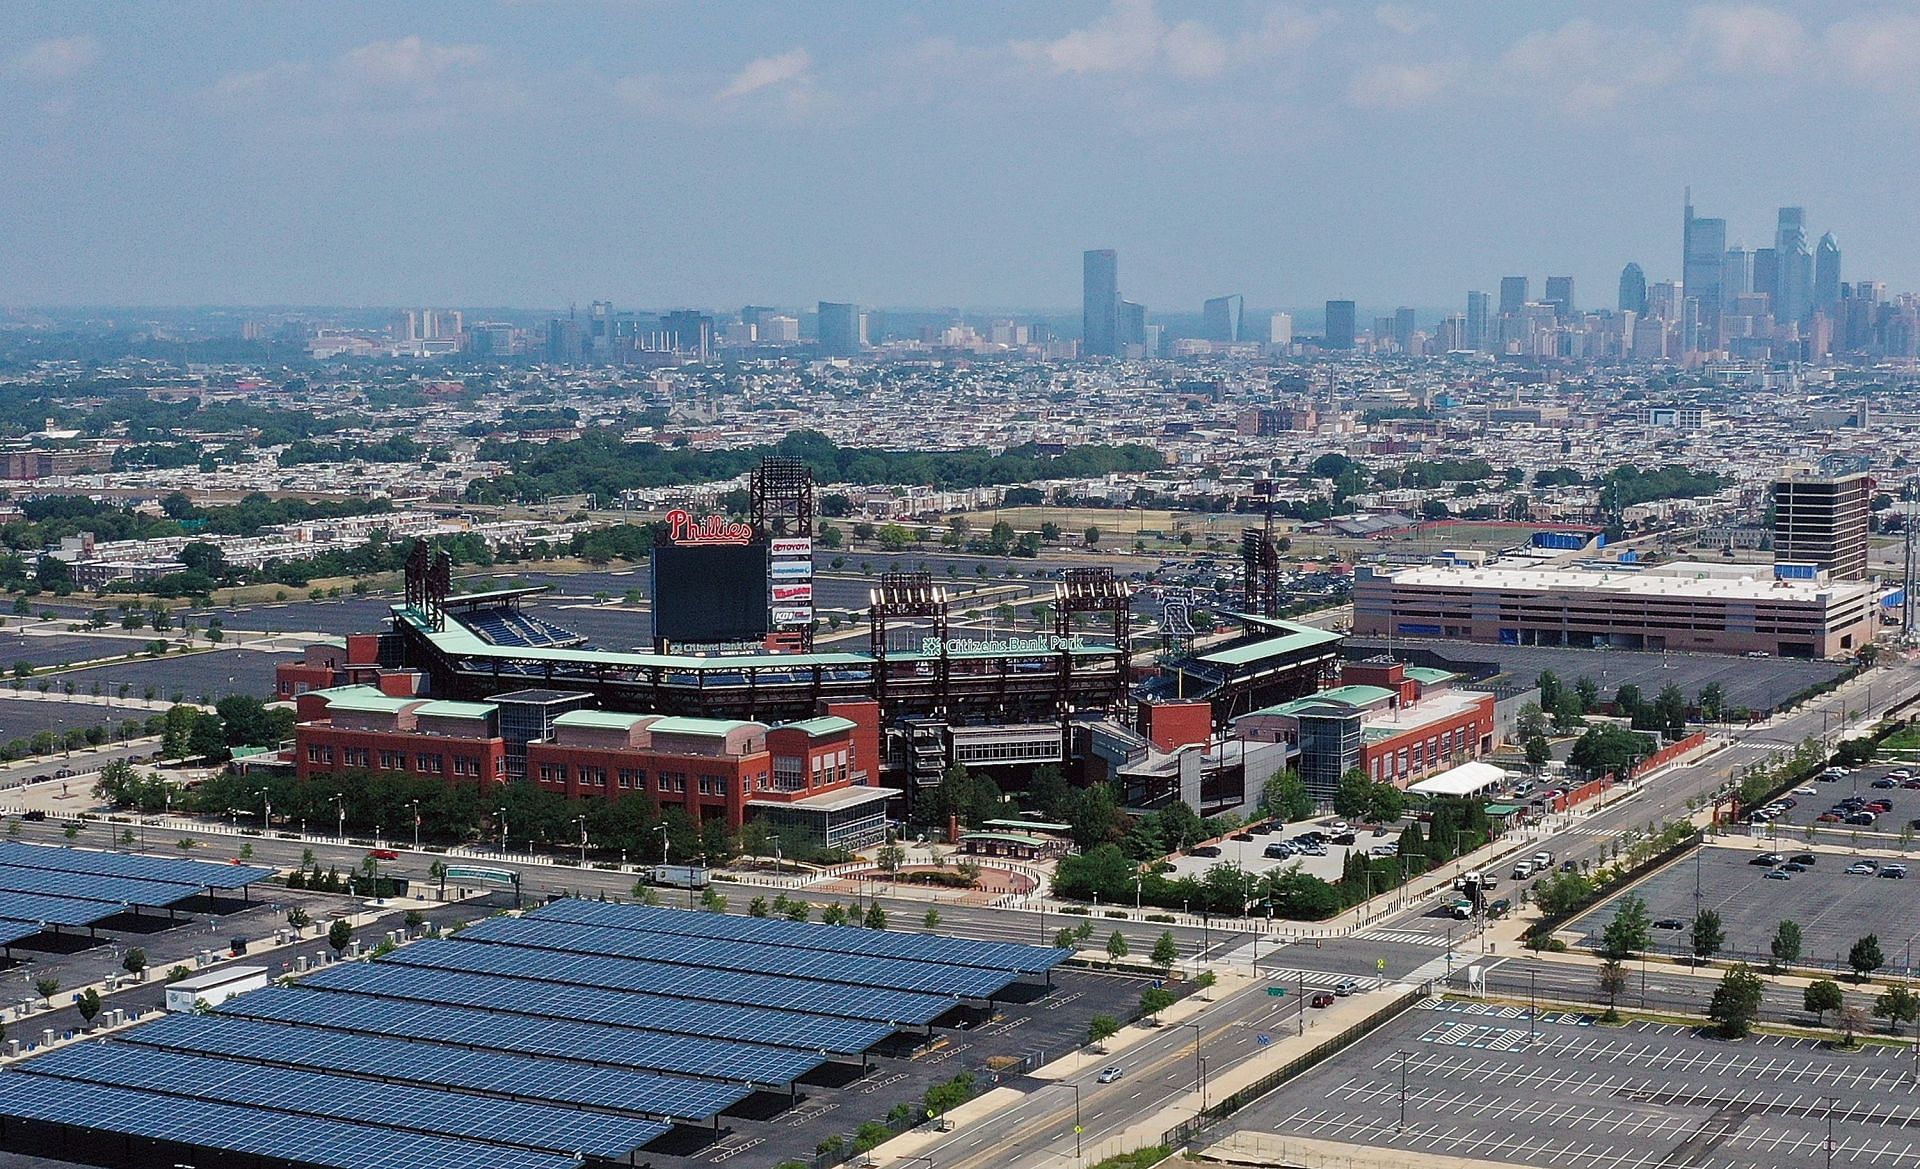 All three Philadelphia sports venues are situated right next to each other.